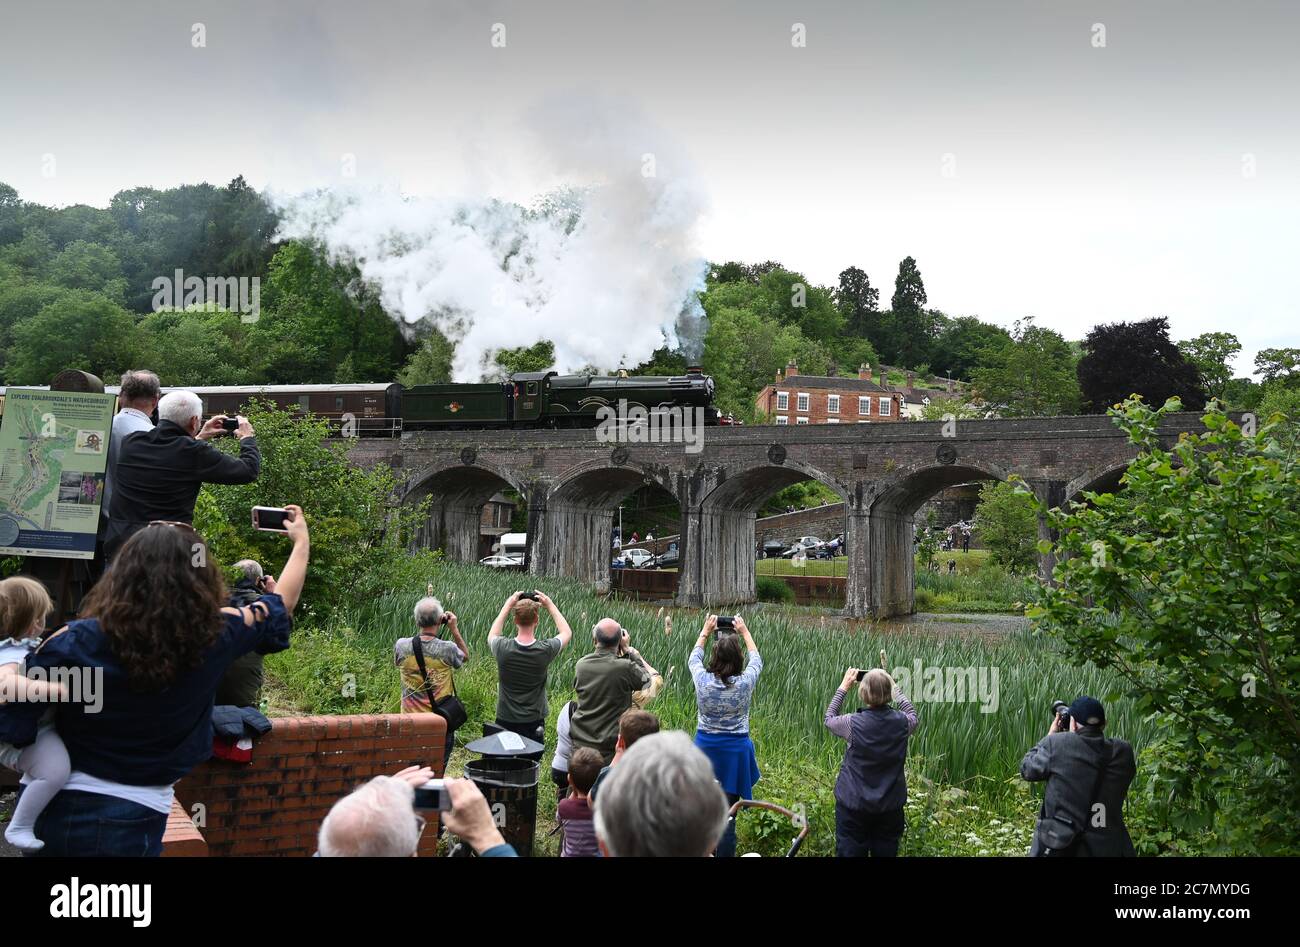 People watching the steam locomotive Clun Castle crossing the Coalbrookdale railway viaduct in Shropshire, England Uk Stock Photo